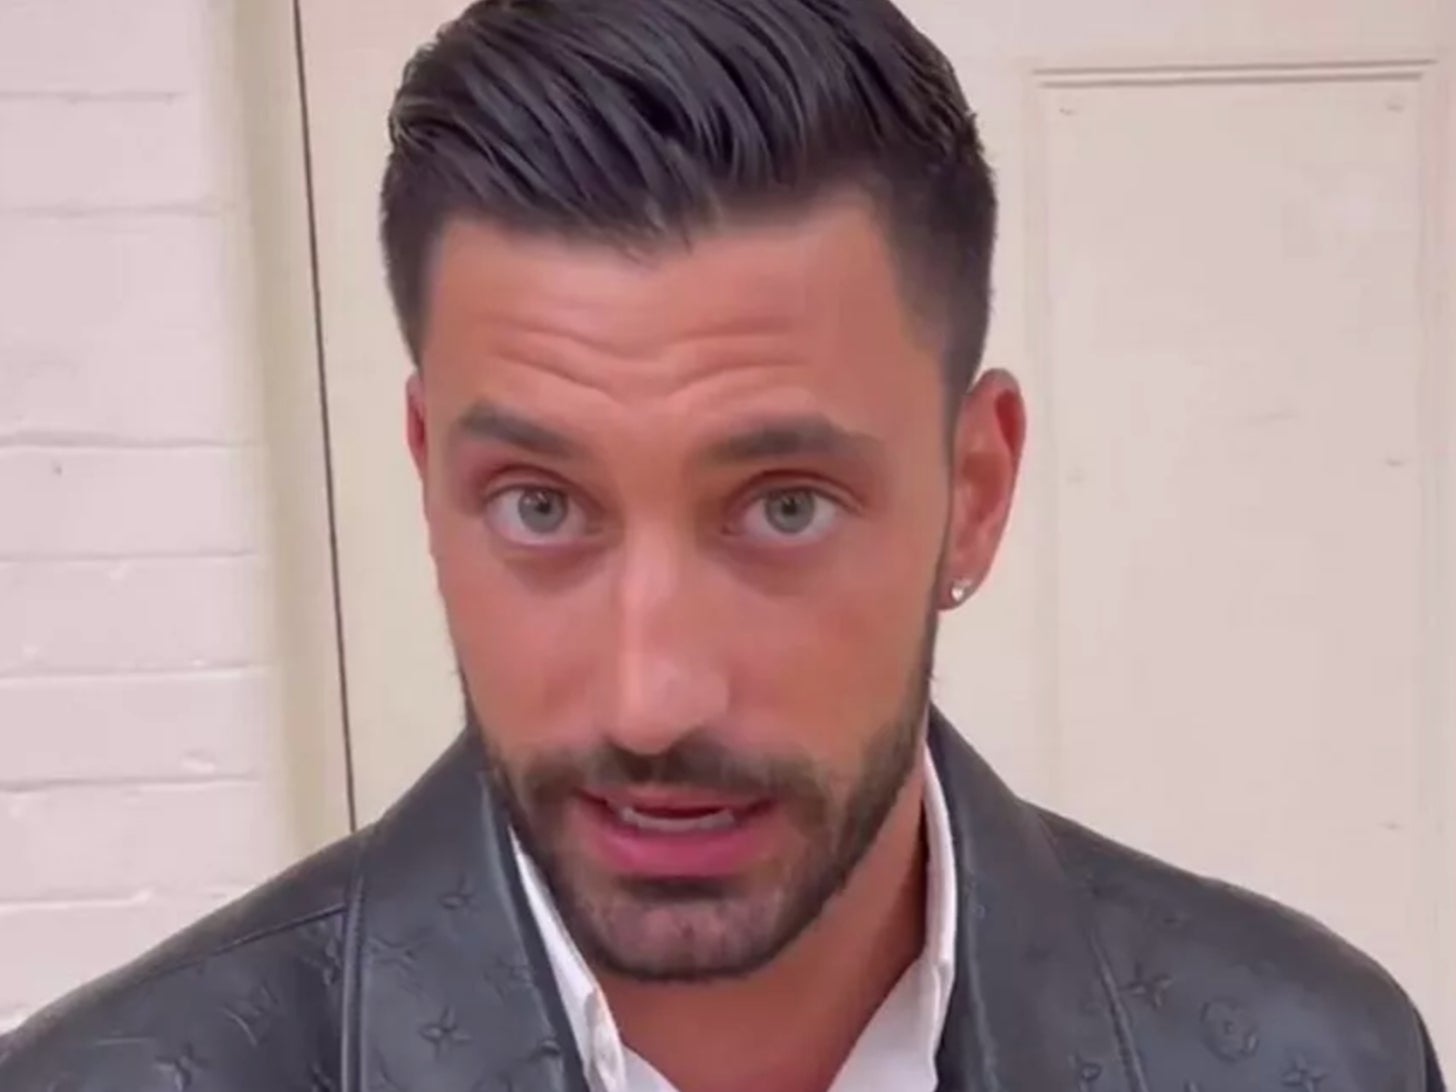 ‘Strictly Come Dancing’ star Giovanni Pernice has denied all allegations